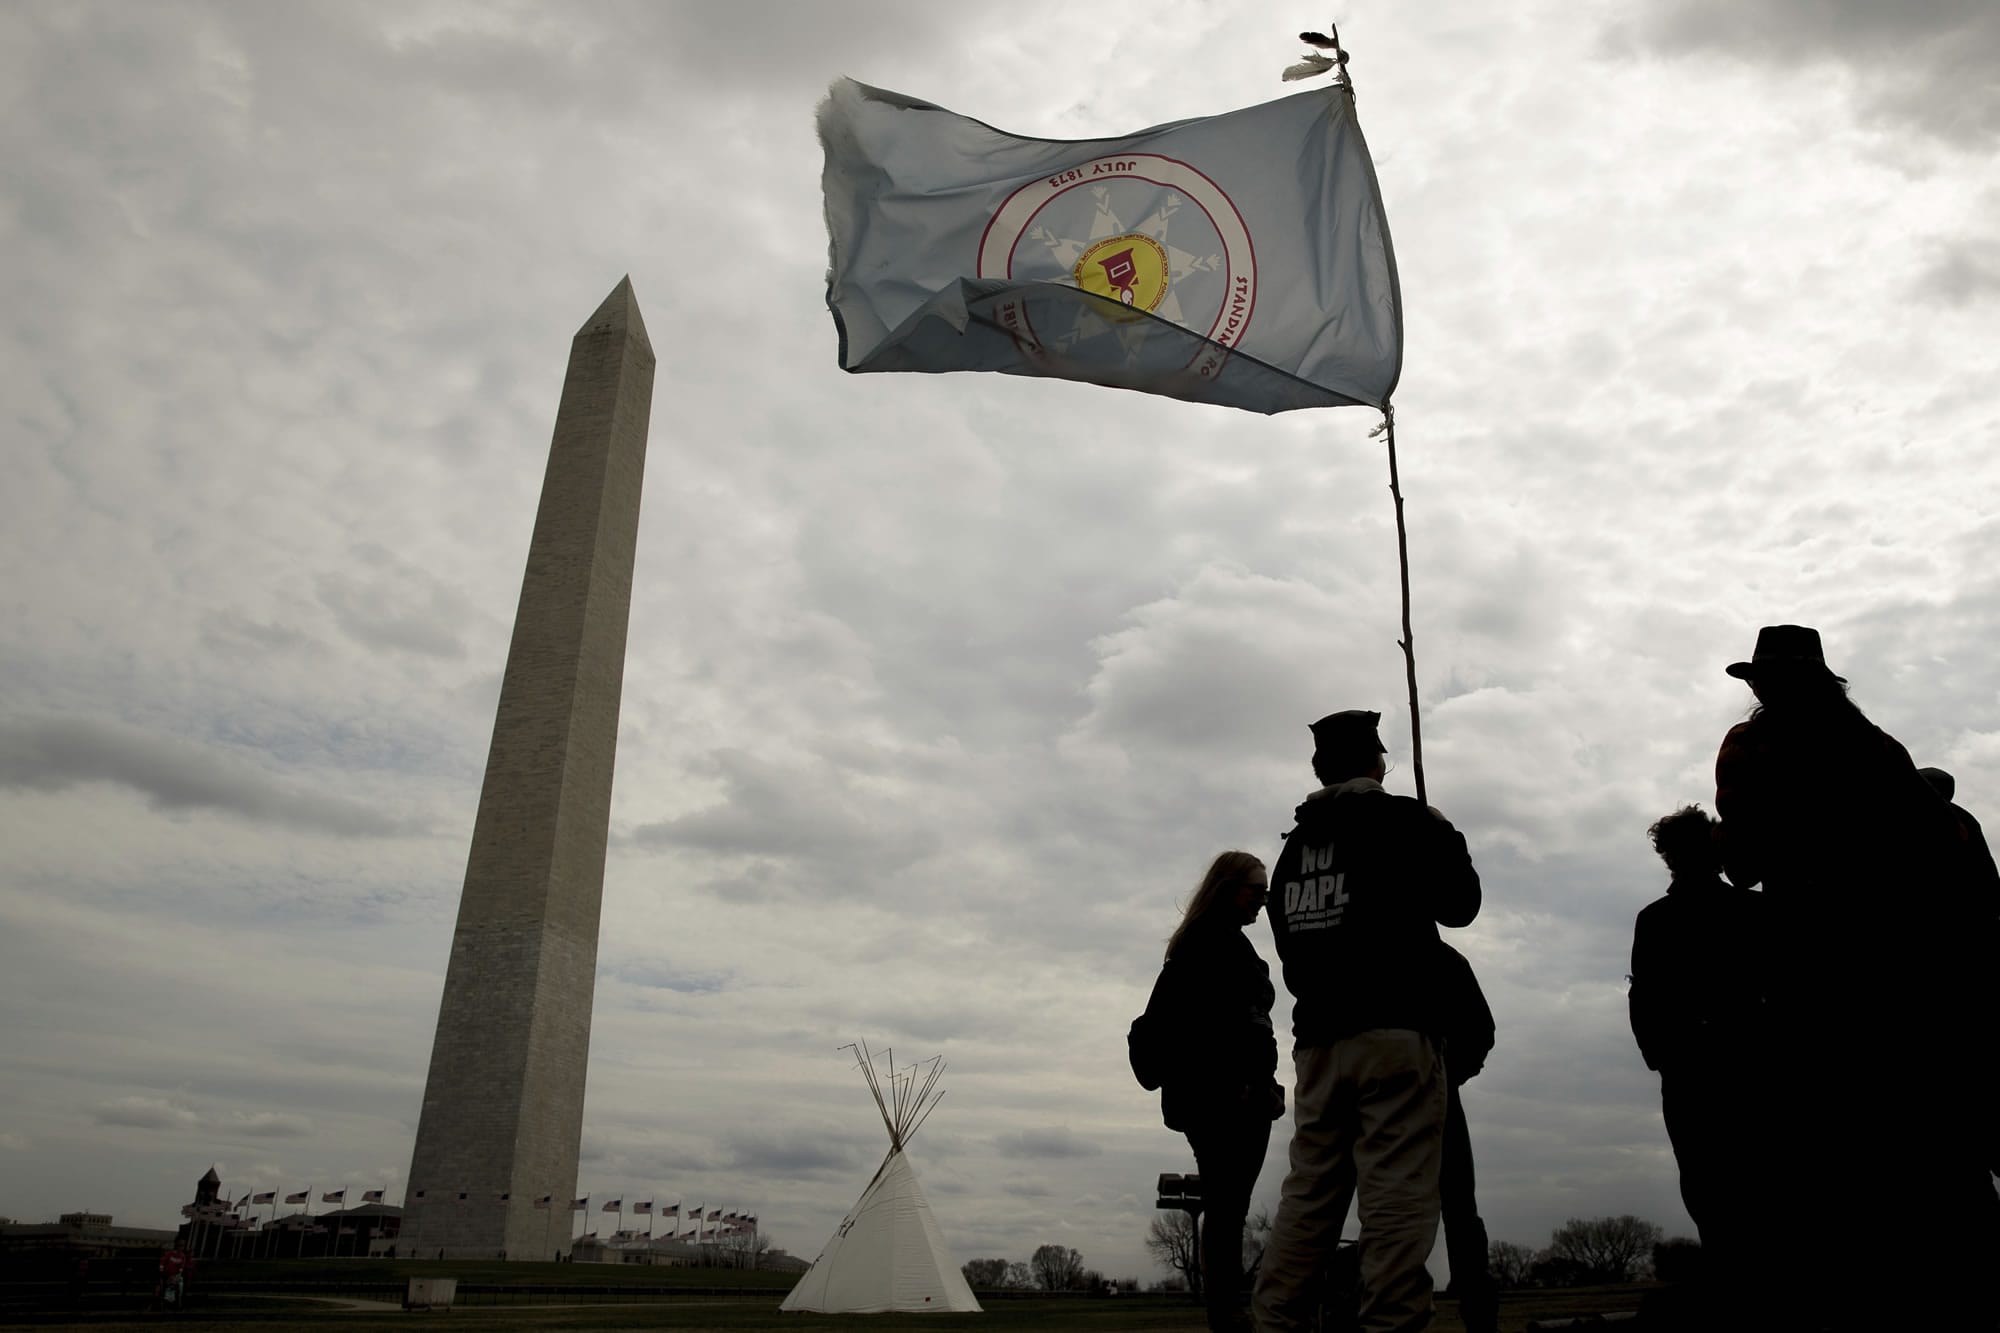 A group protesting the Dakota Access oil pipeline has set up teepees on the National Mall near the Washington Monument in Washington, Tuesday, March 7, 2017. A federal judge declined to temporarily stop construction of the final section of the disputed Dakota Access oil pipeline, clearing the way for oil to flow as soon as next week.